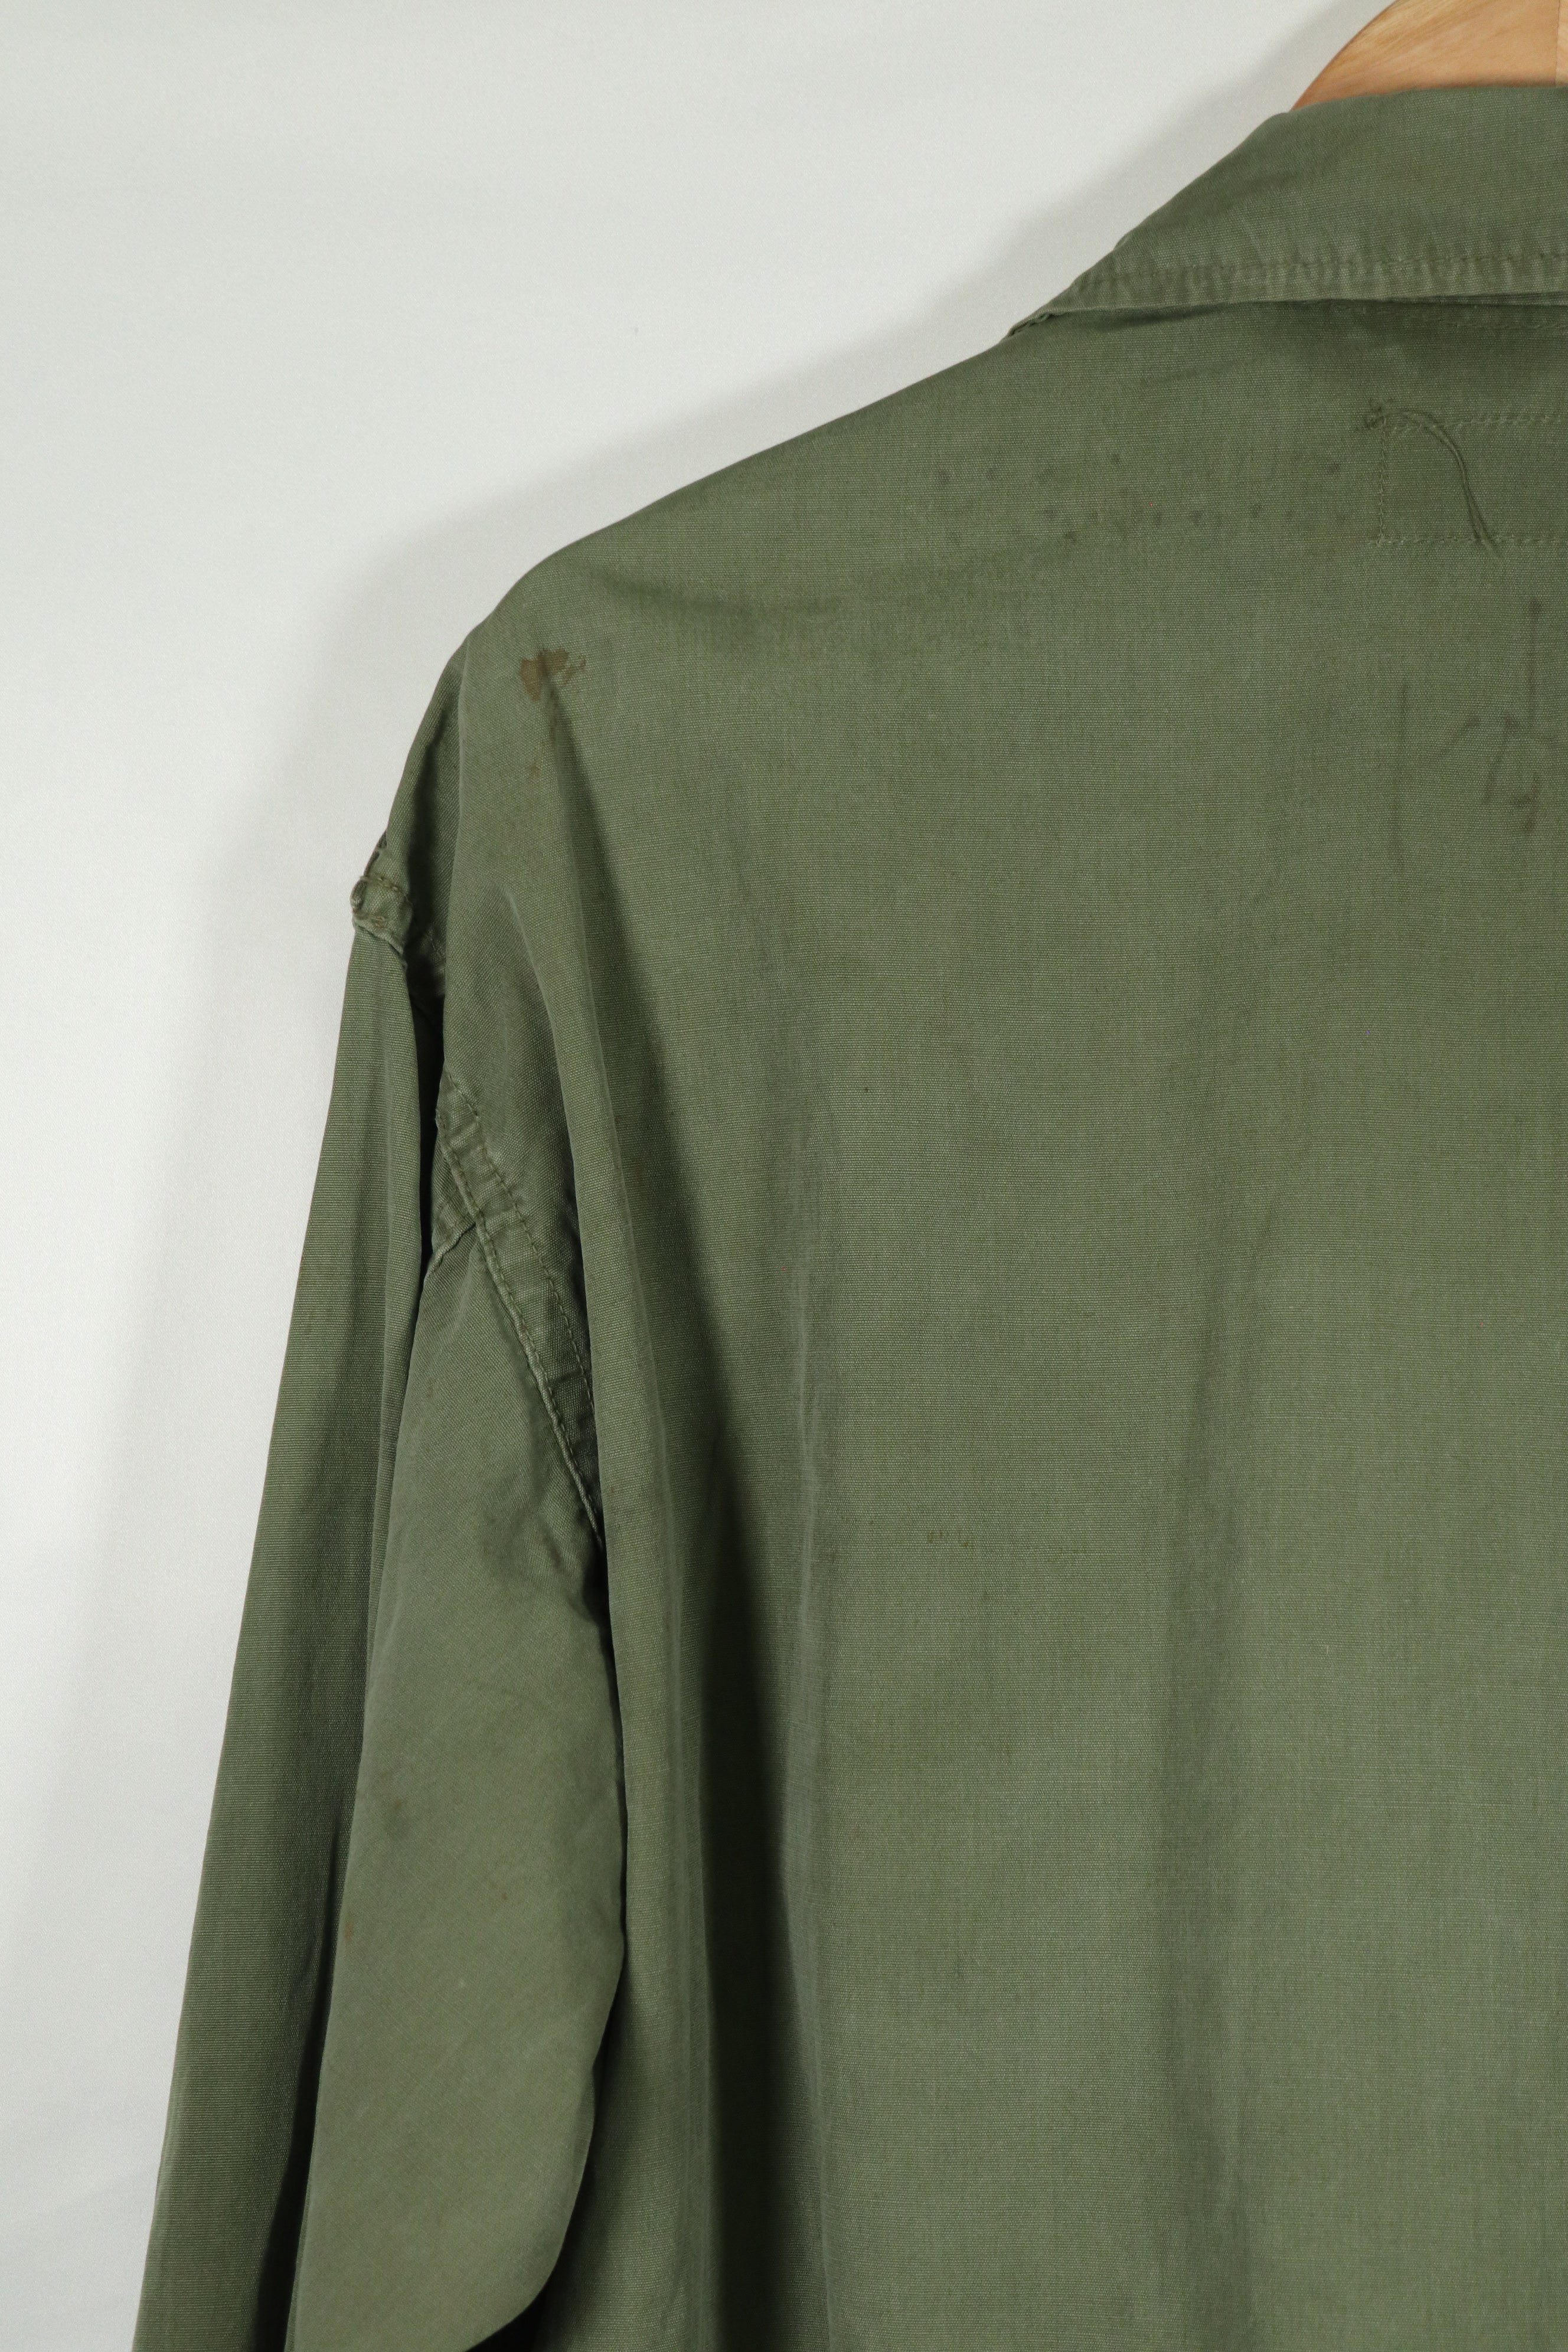 Real 1963 1st Model Jungle Fatigue Jacket MEDIUM-LONG, used with fading.